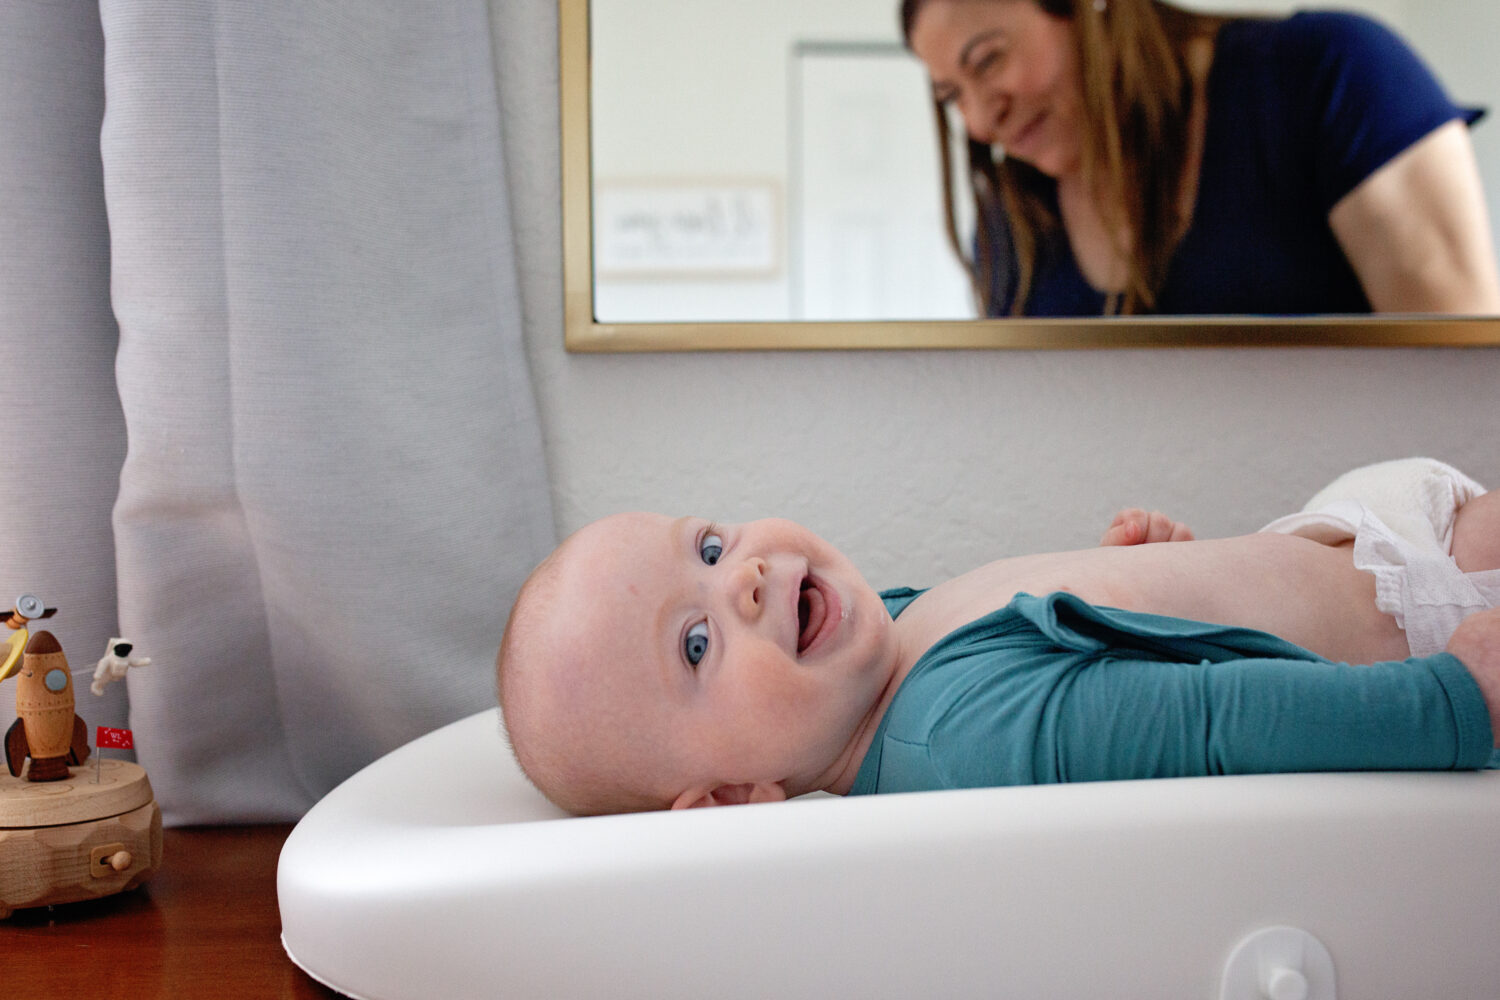 Laughing baby on changing table with mom laughing